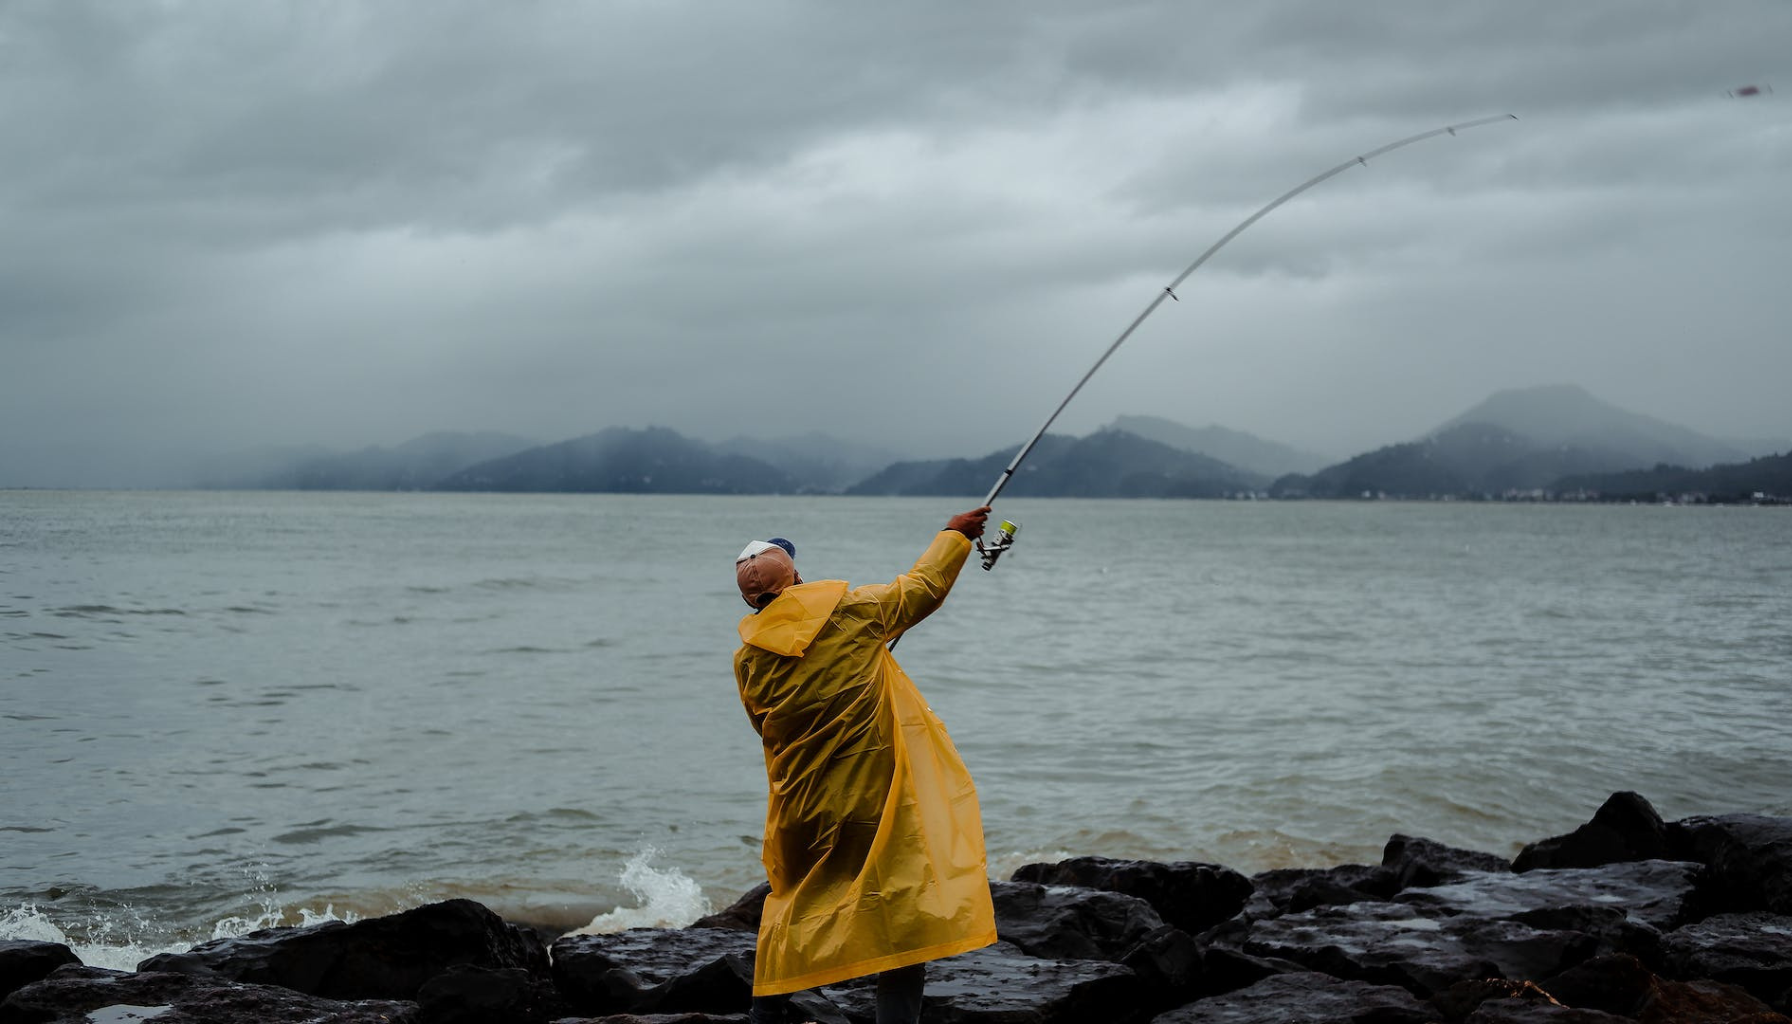 Angler in yellow raincoat casting his line from rocky terrain during gloomy weather.